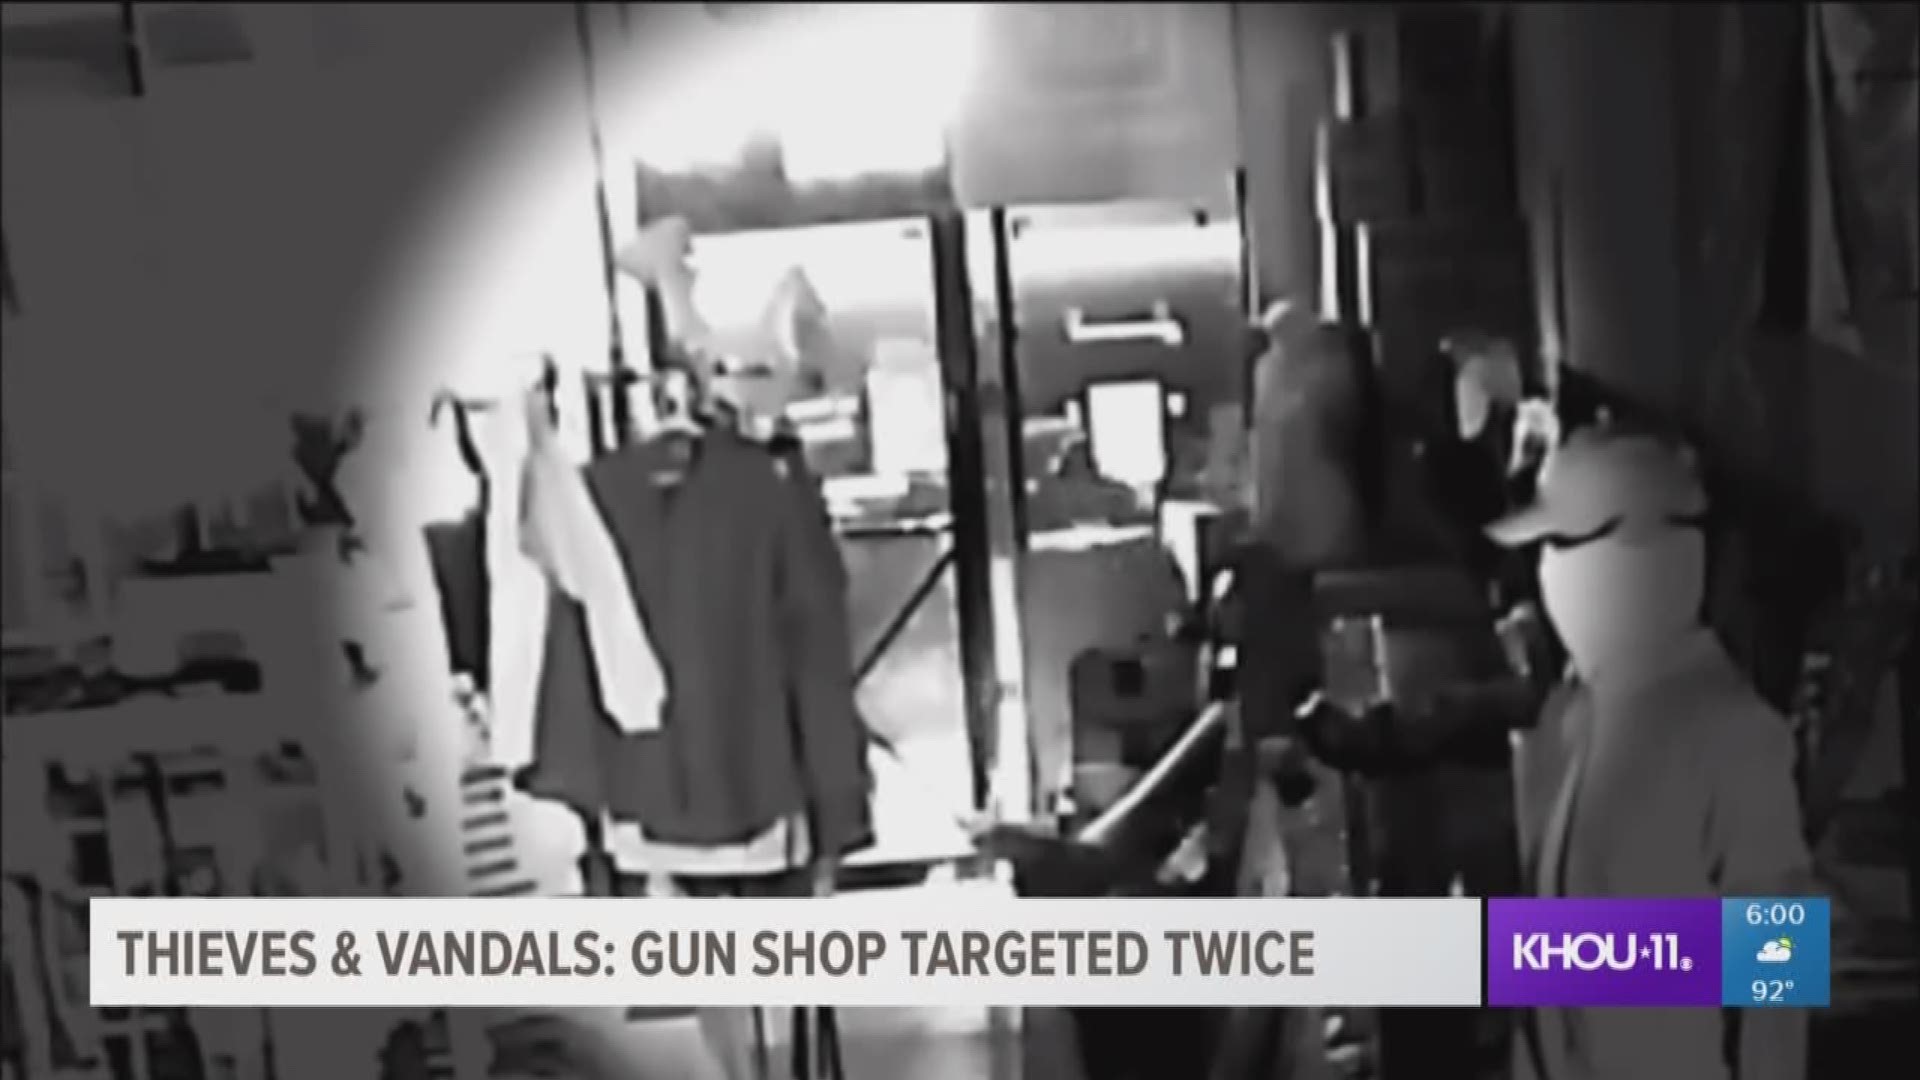 An Humble gun shop was caught in a criminal's cross-hairs twice recently. Thieves made off with some high-powered weapons. The most recent attack was caught on camera.